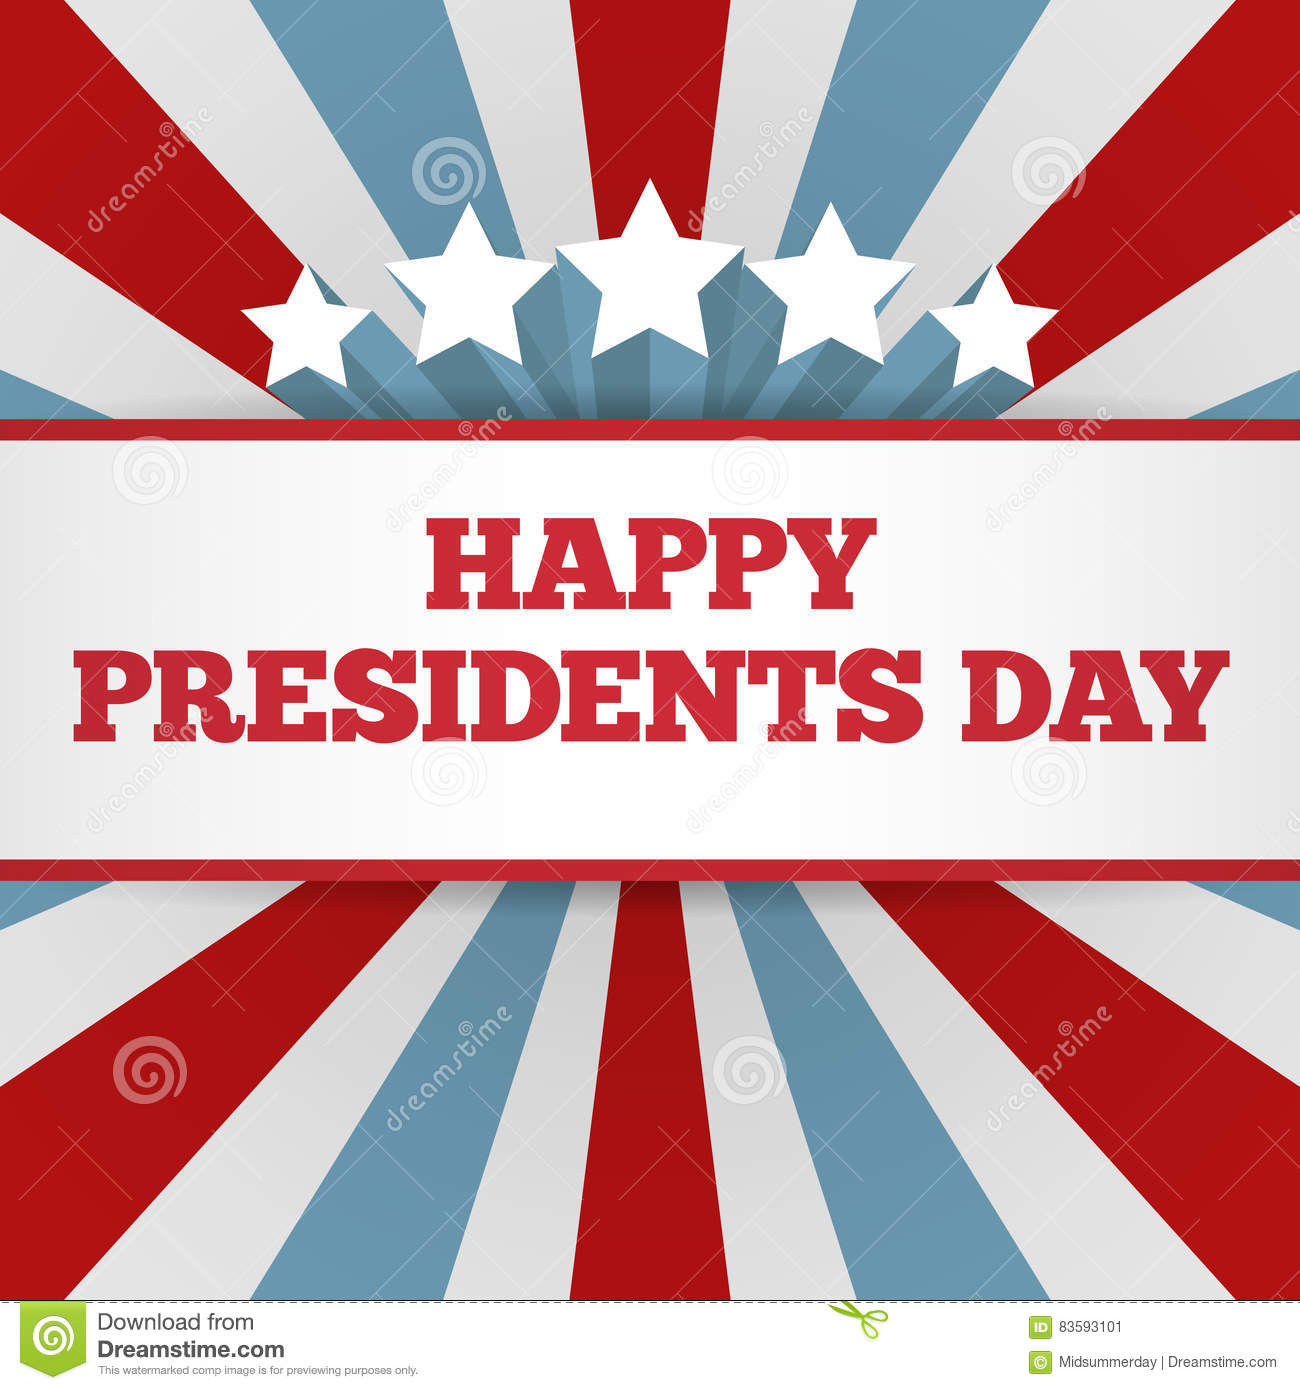 Free download Presidents Day Background USA Patriotic Vector Template ...